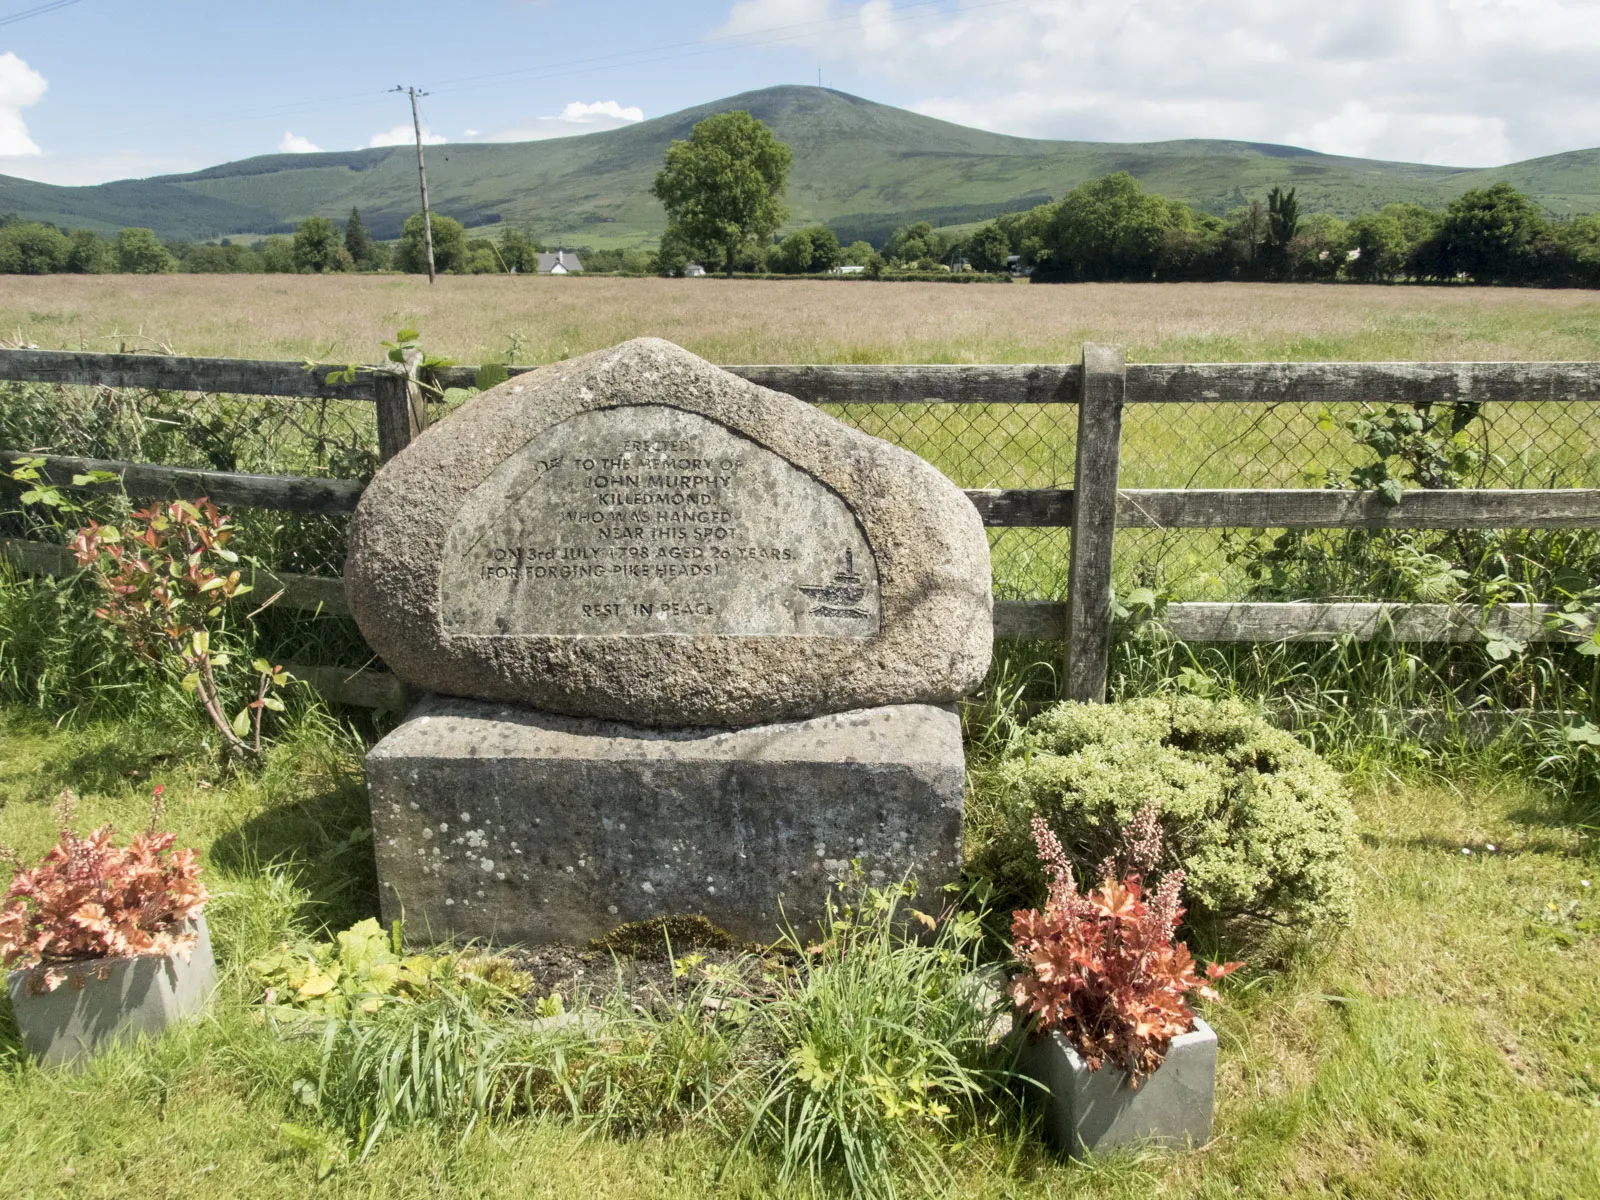 Photo showing: Memorial and mountain